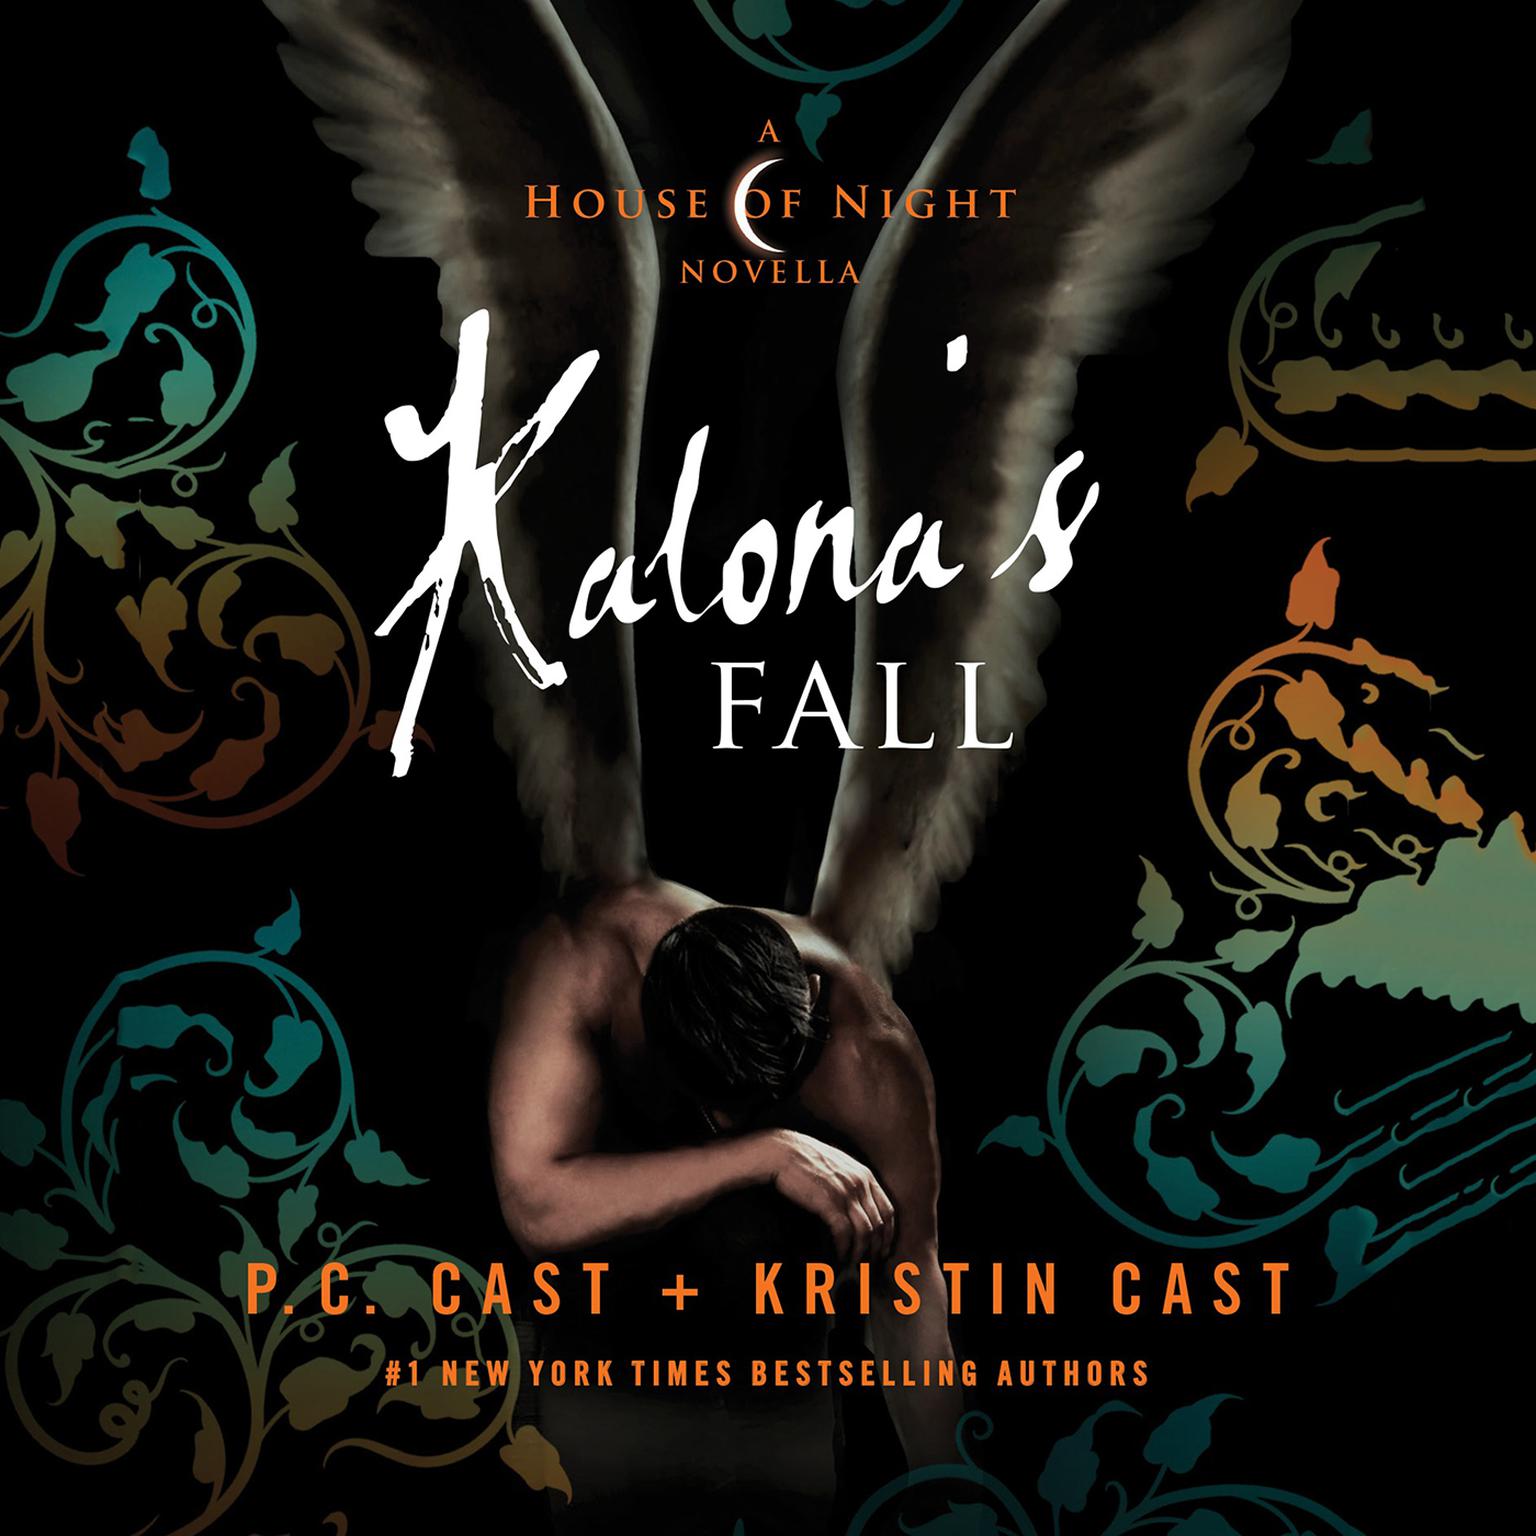 Kalonas Fall: A House of Night Novella Audiobook, by P. C. Cast